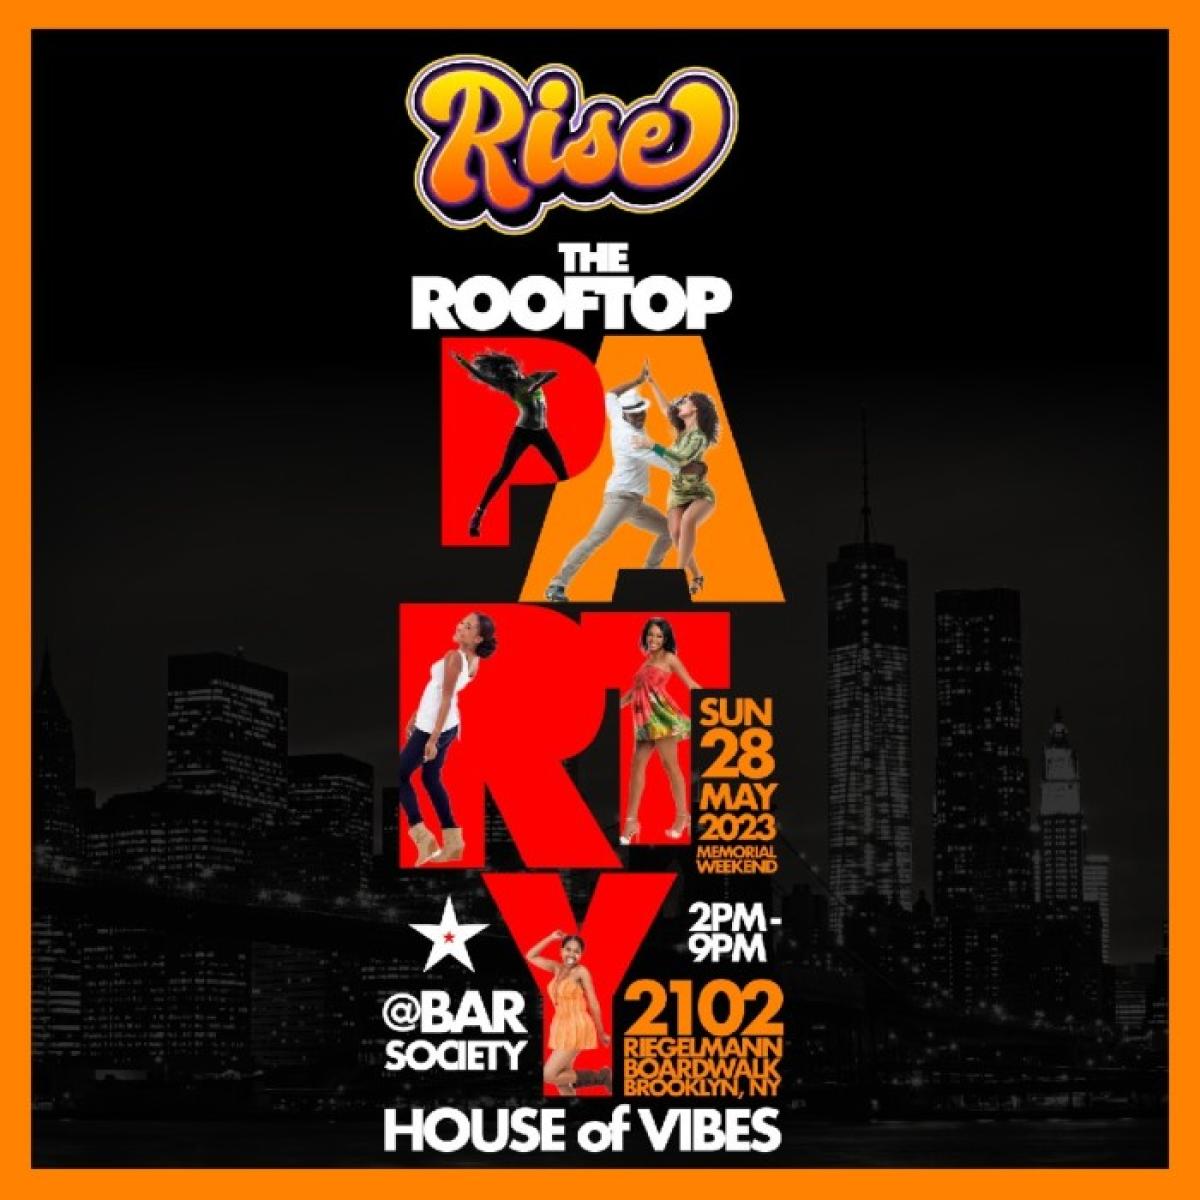 Rise flyer or graphic.